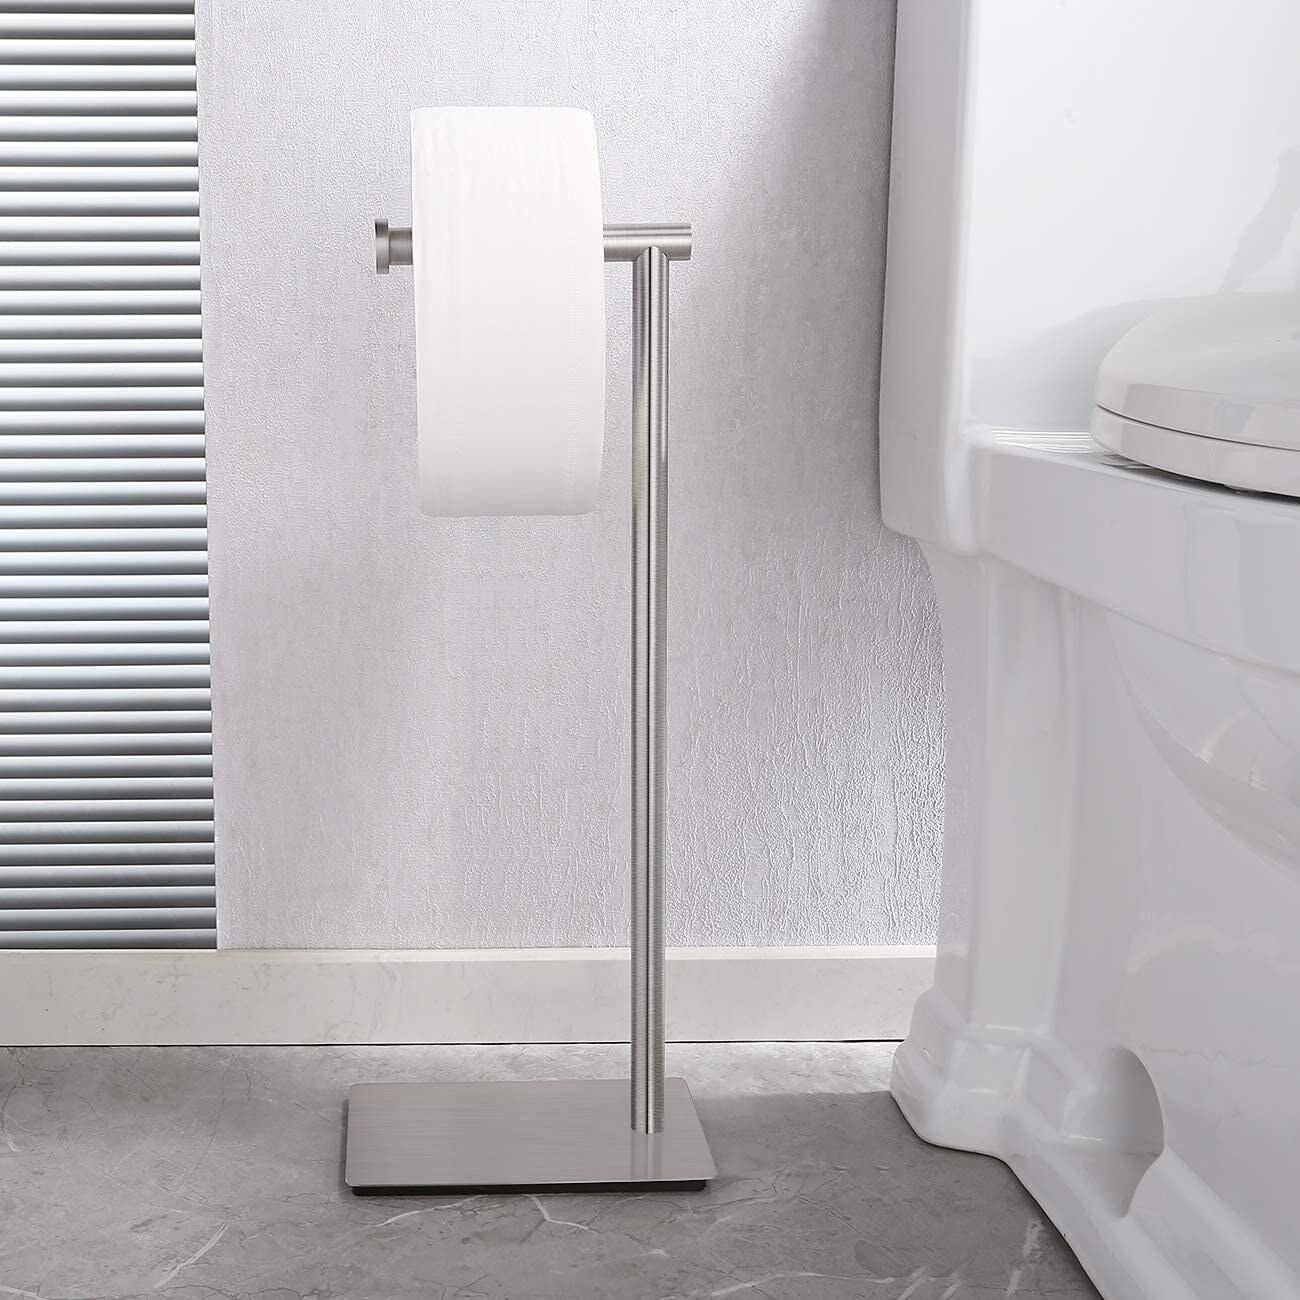 https://ak1.ostkcdn.com/images/products/is/images/direct/eccd73207c75e810d80ee7636a7c76498451b4d0/Freestanding-Toilet-Paper-Holder.jpg